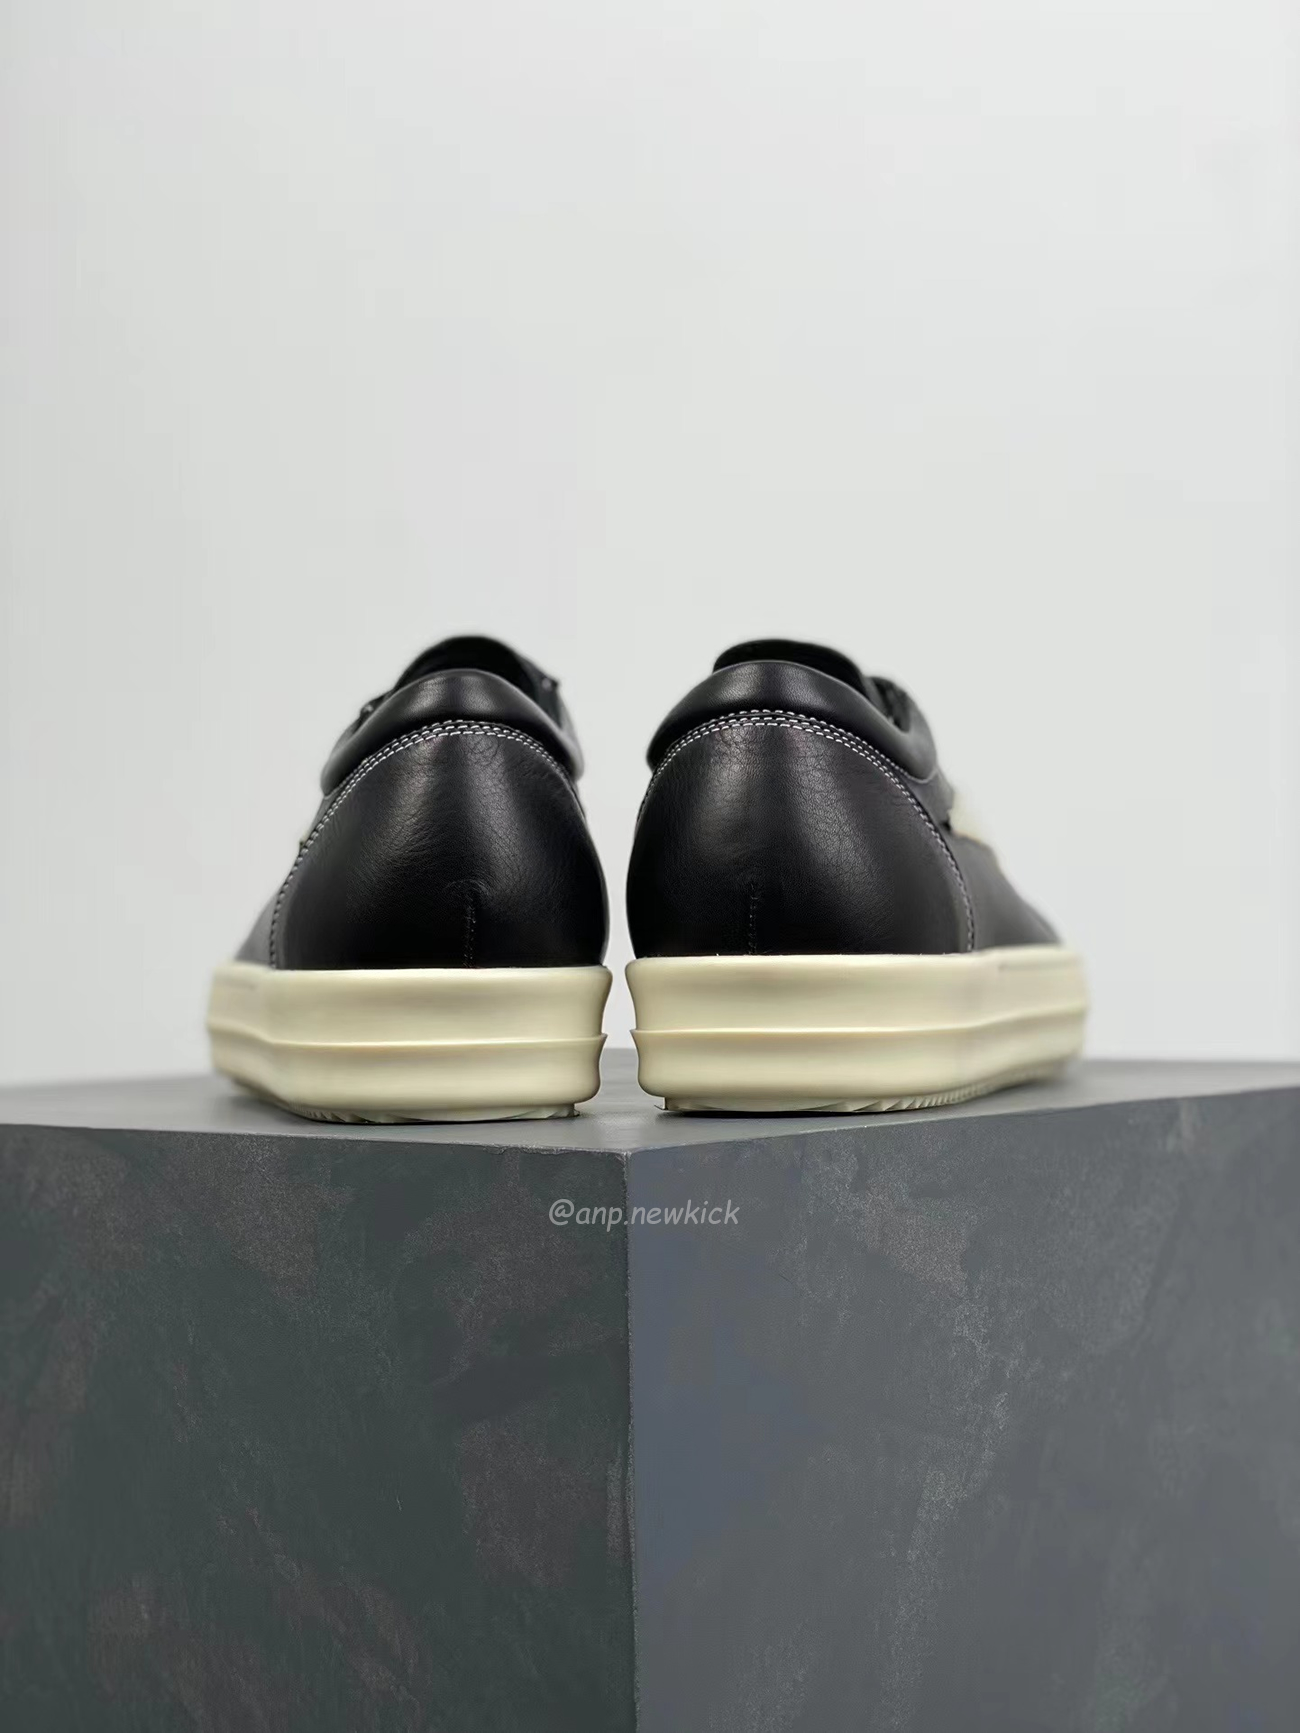 Rick Owens Leather Low Top Vintage Sneakers Suede Canvas Black Taupe Grey Faded Pnk Pearl Milk Dark Dust (11) - newkick.org